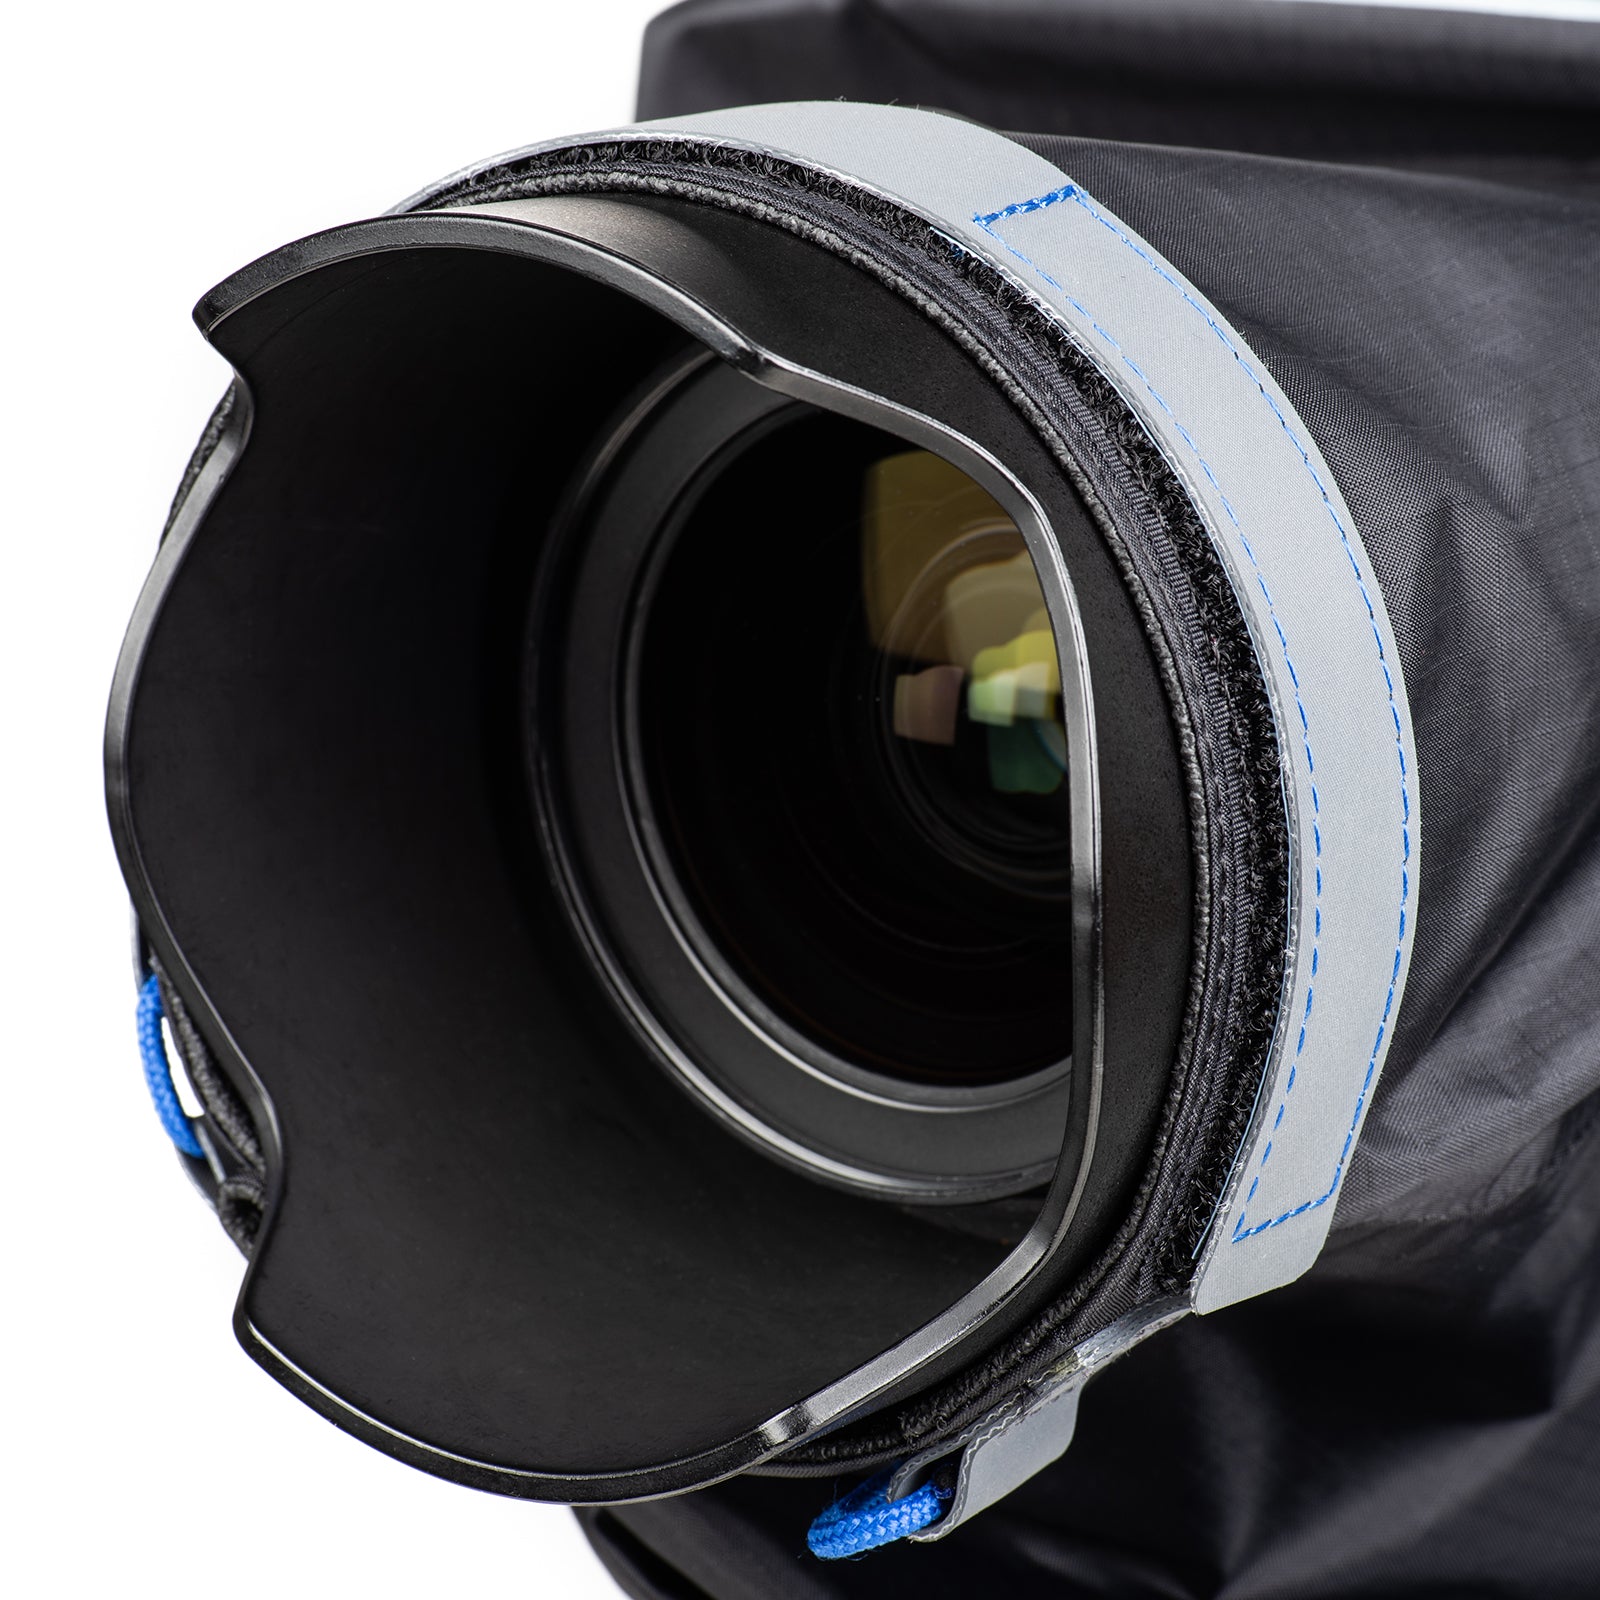 Non-slip, adjustable strap attaches directly to the lens hood